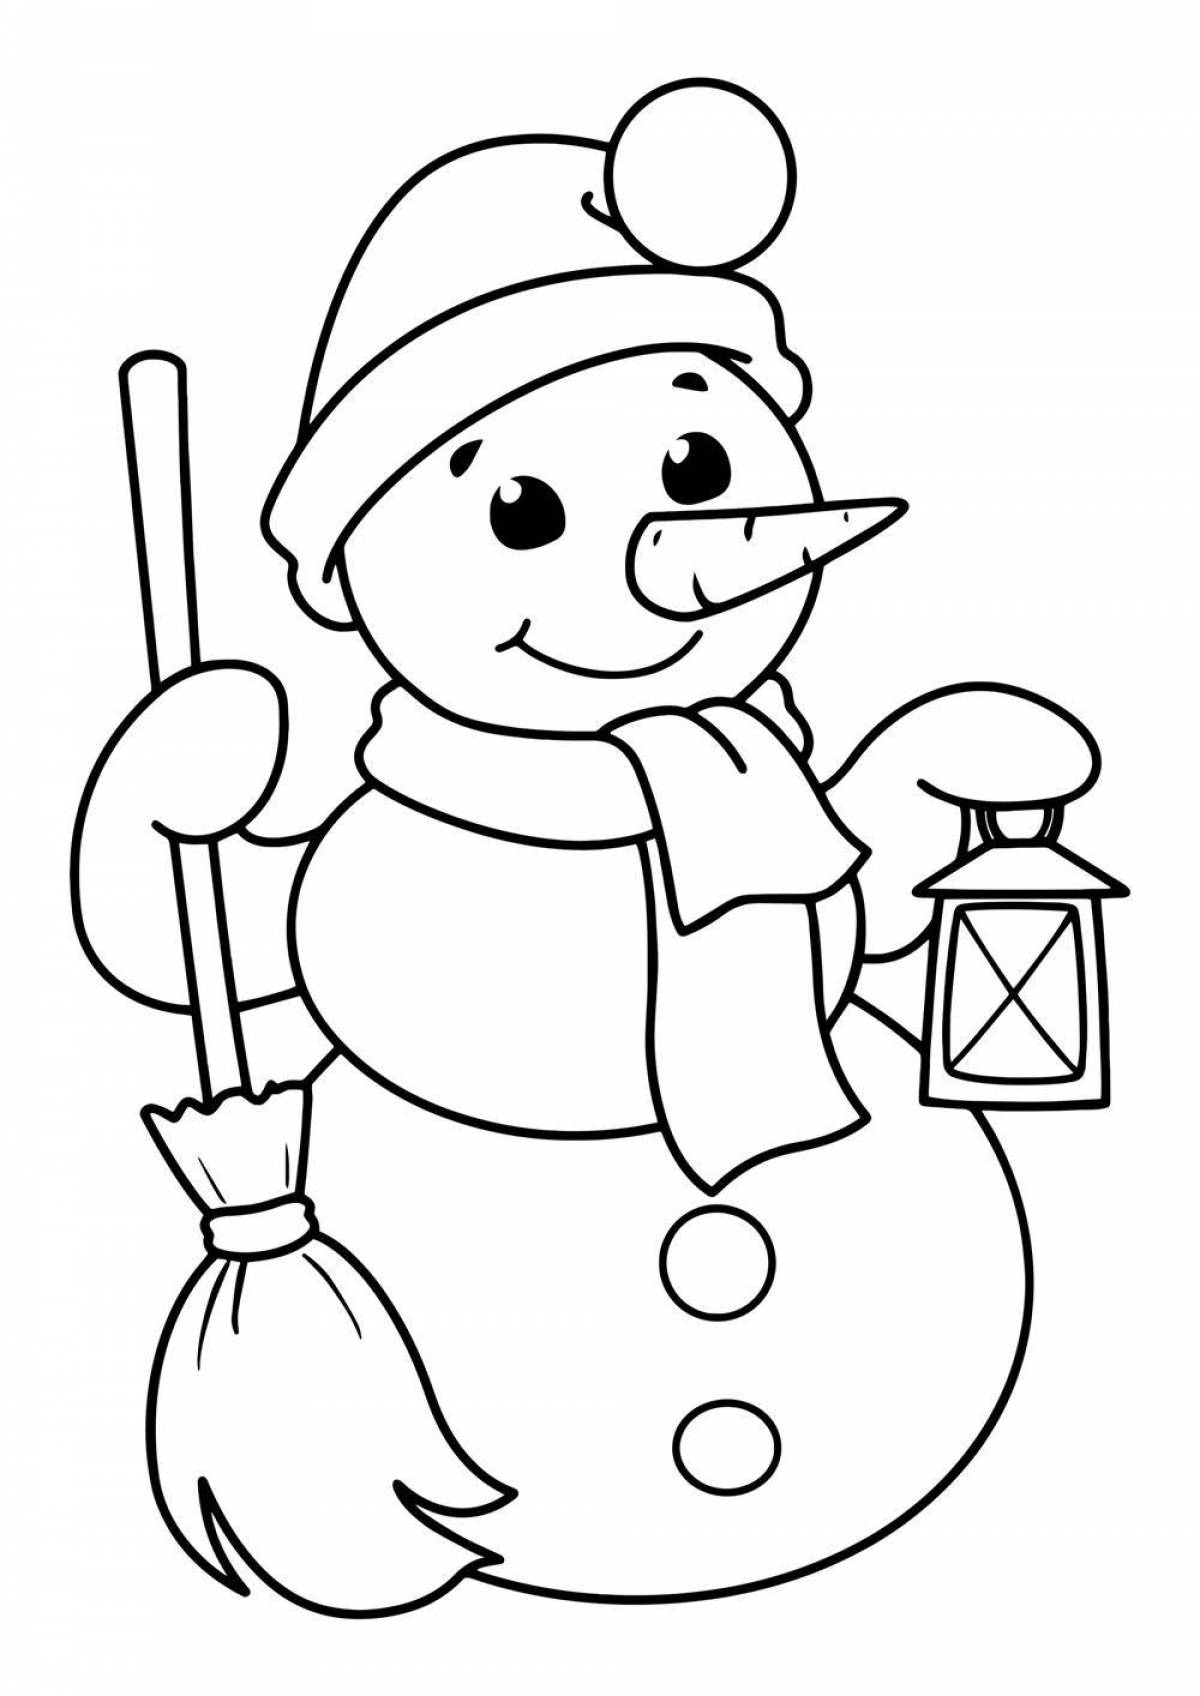 Colorful snowman coloring book for children 3 4